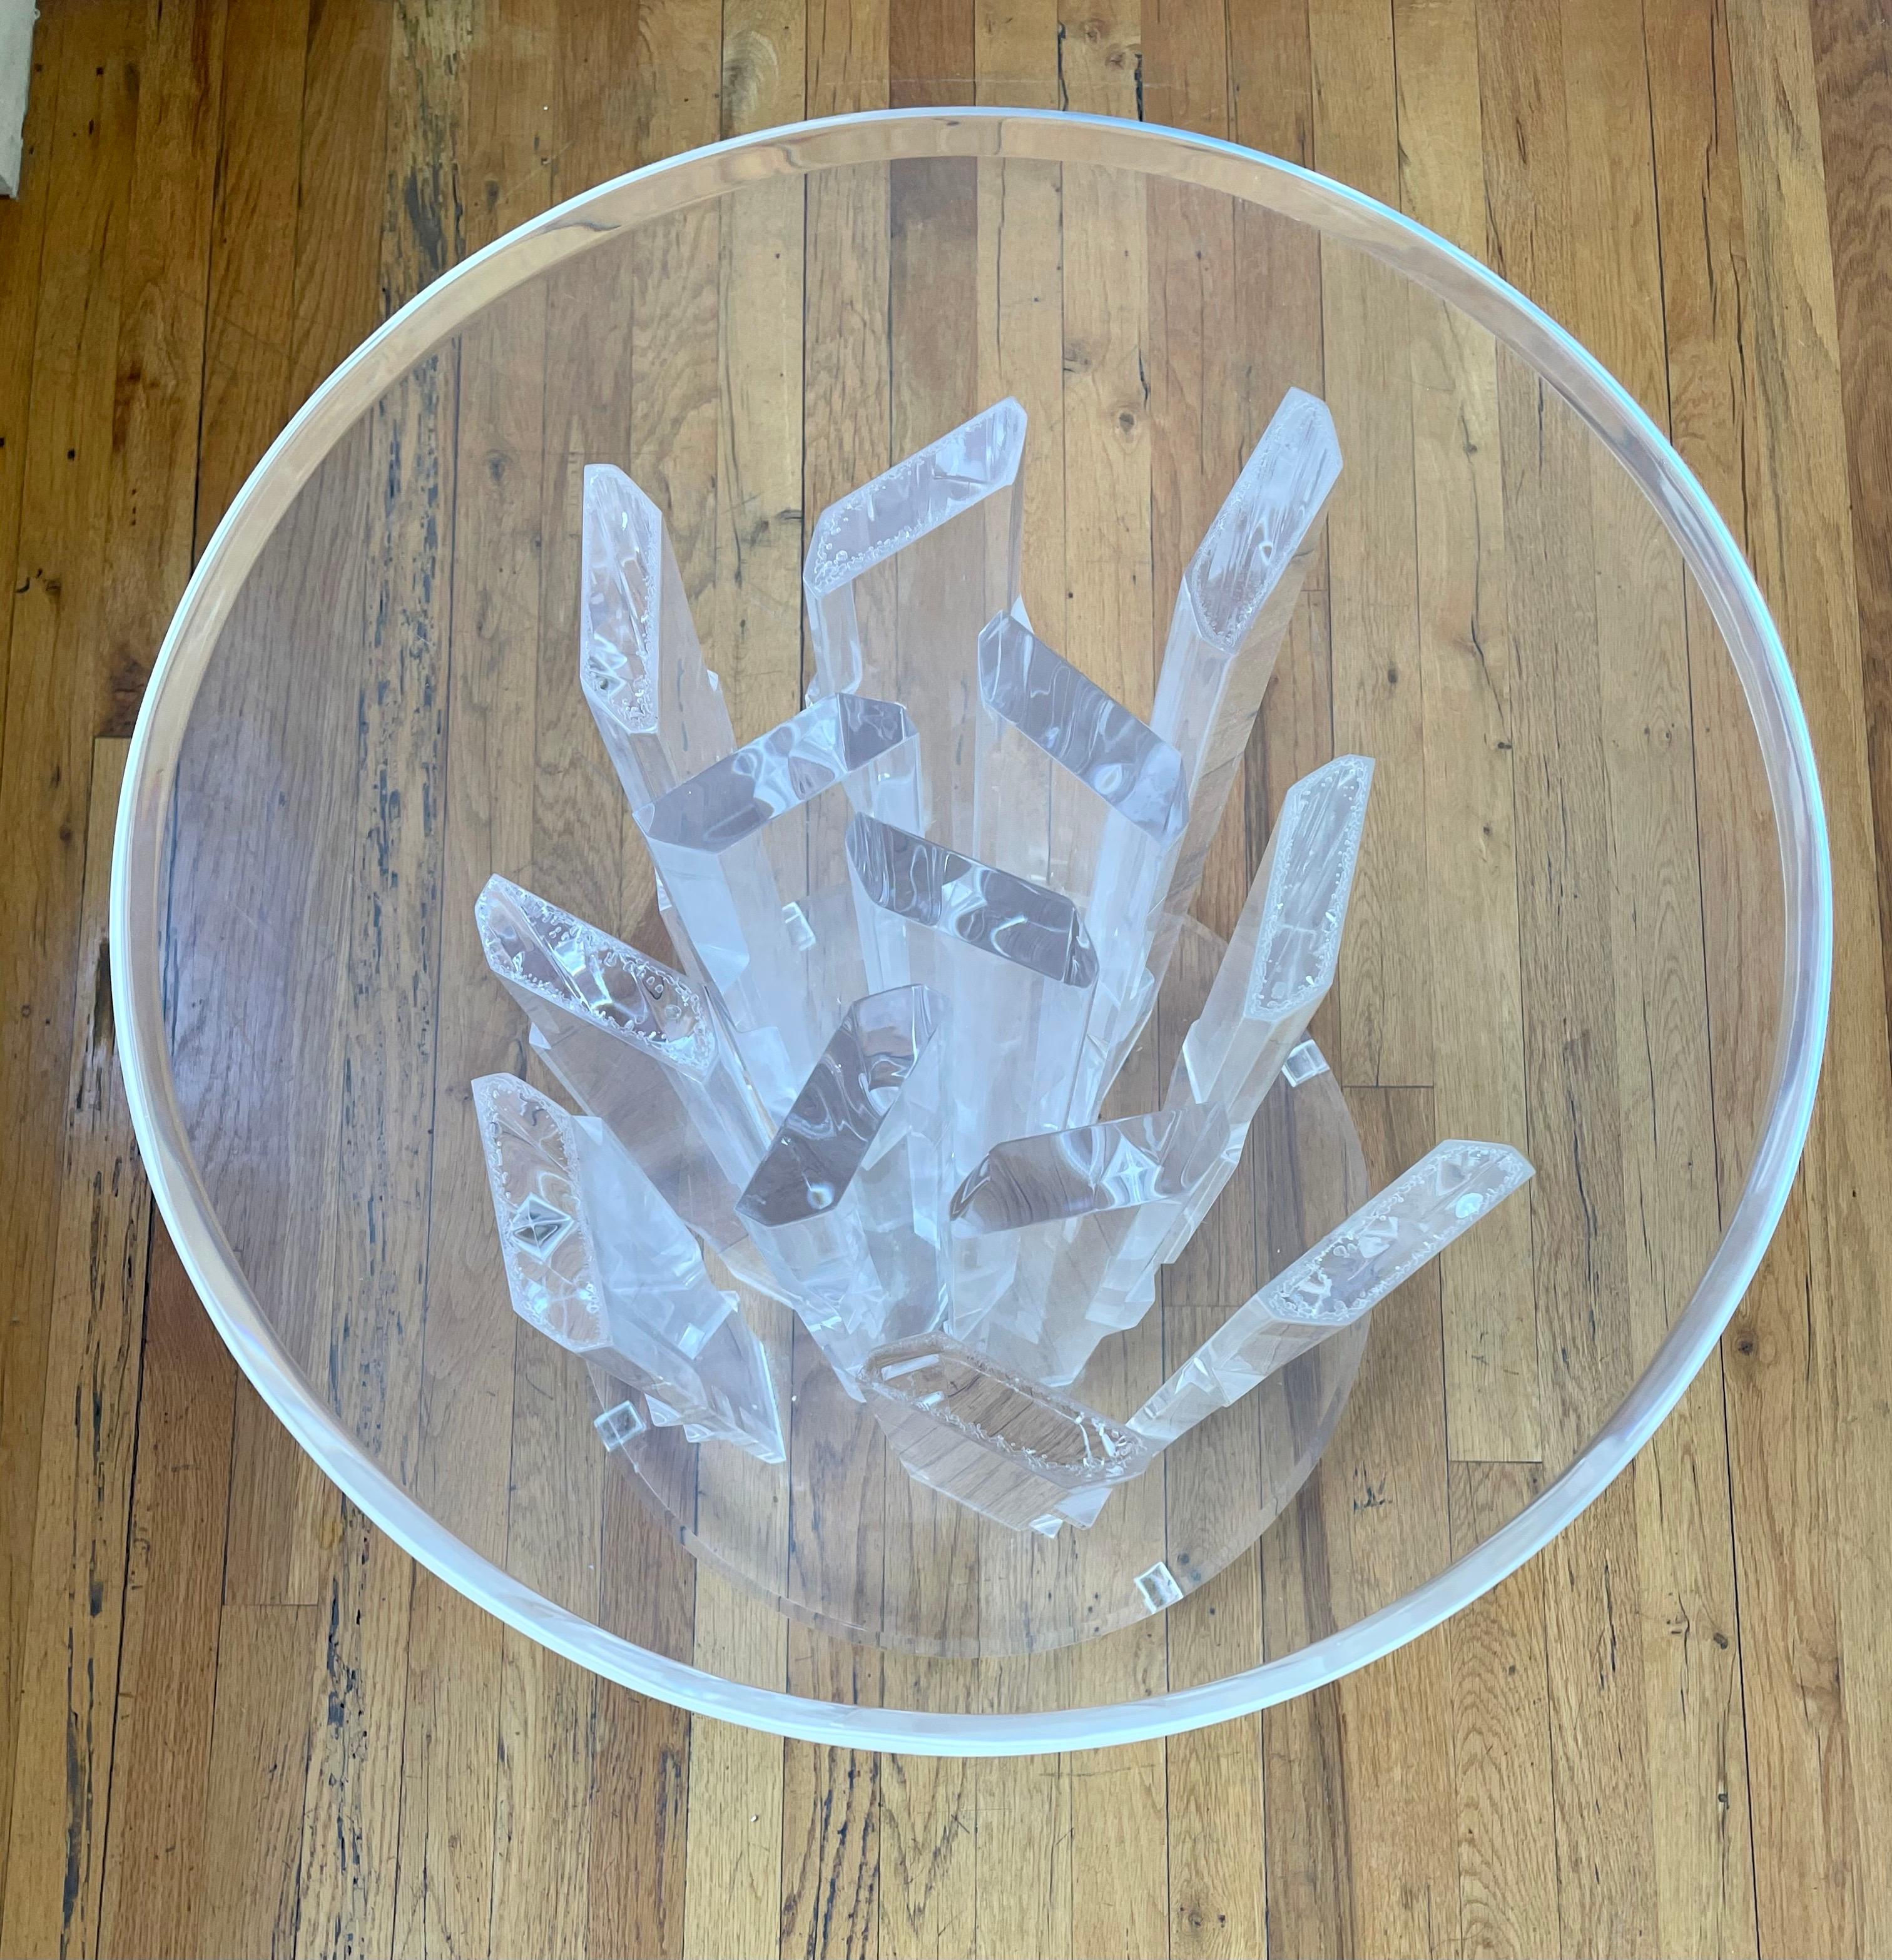 American Striking Solid Thick Lucite Sculptural Table Dining Base